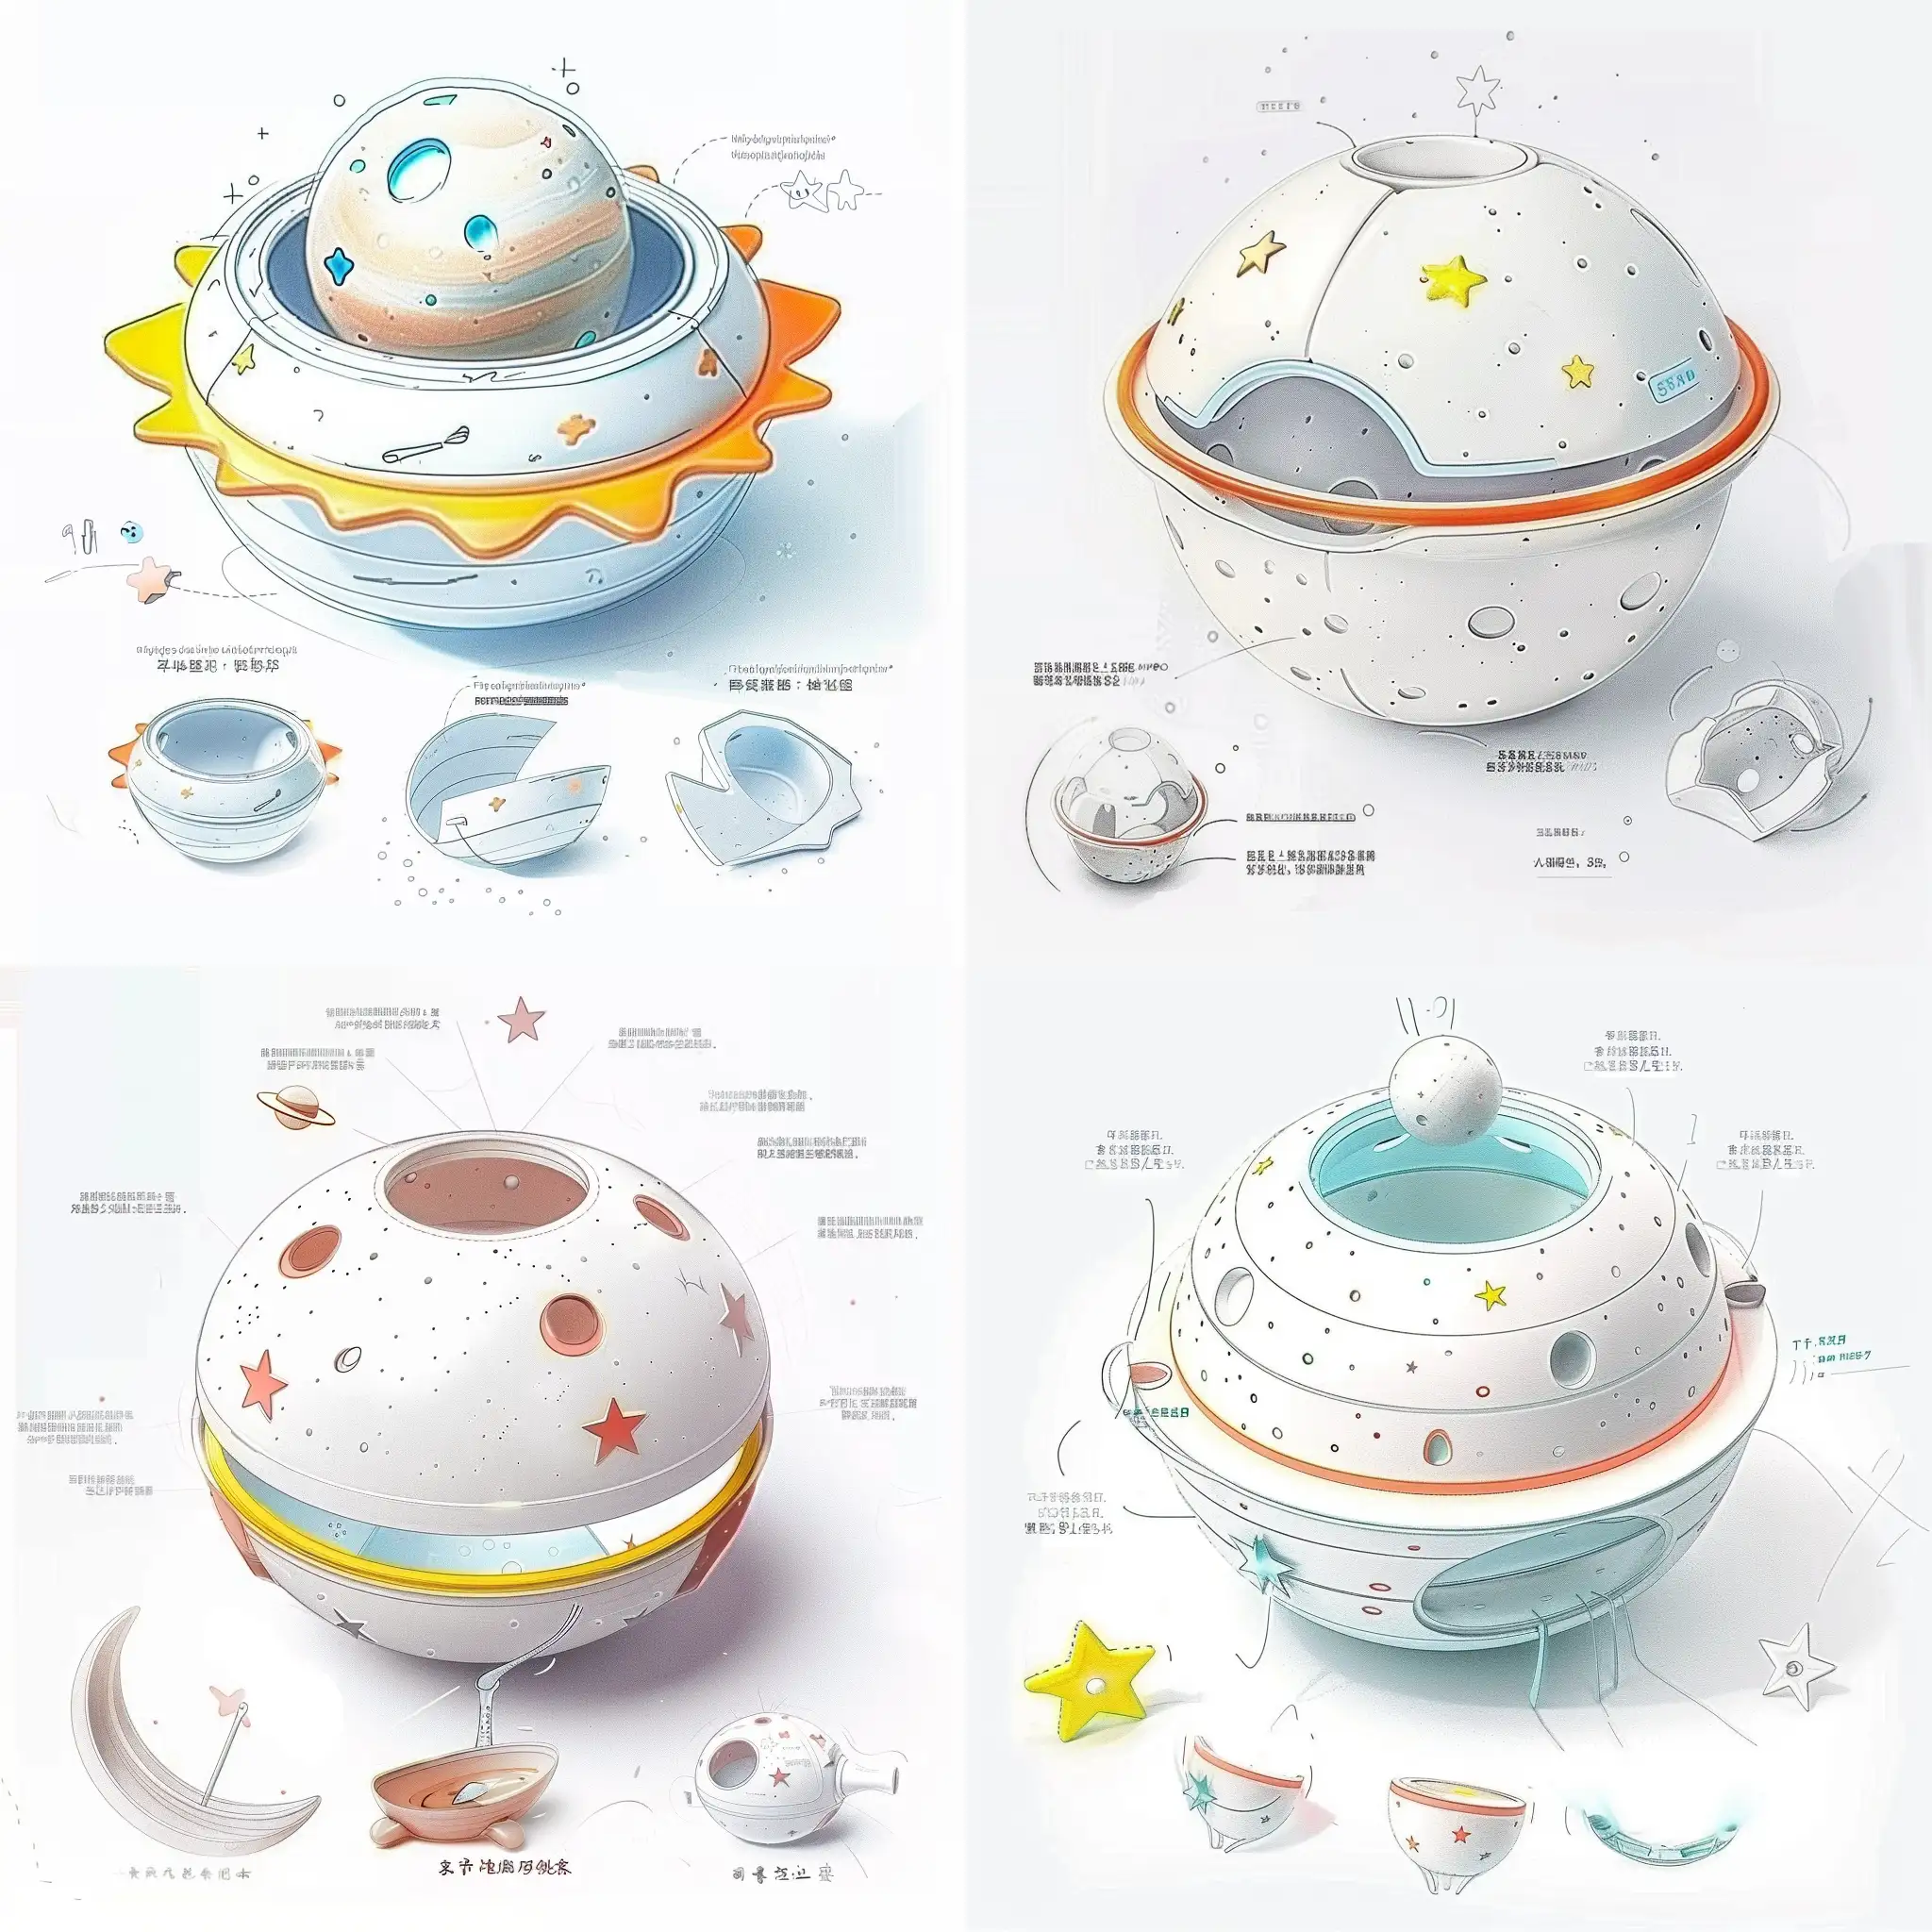 Childrens-Thermal-Preservation-Bowl-Design-Sketch-Cute-and-Portable-HandDrawn-Scheme